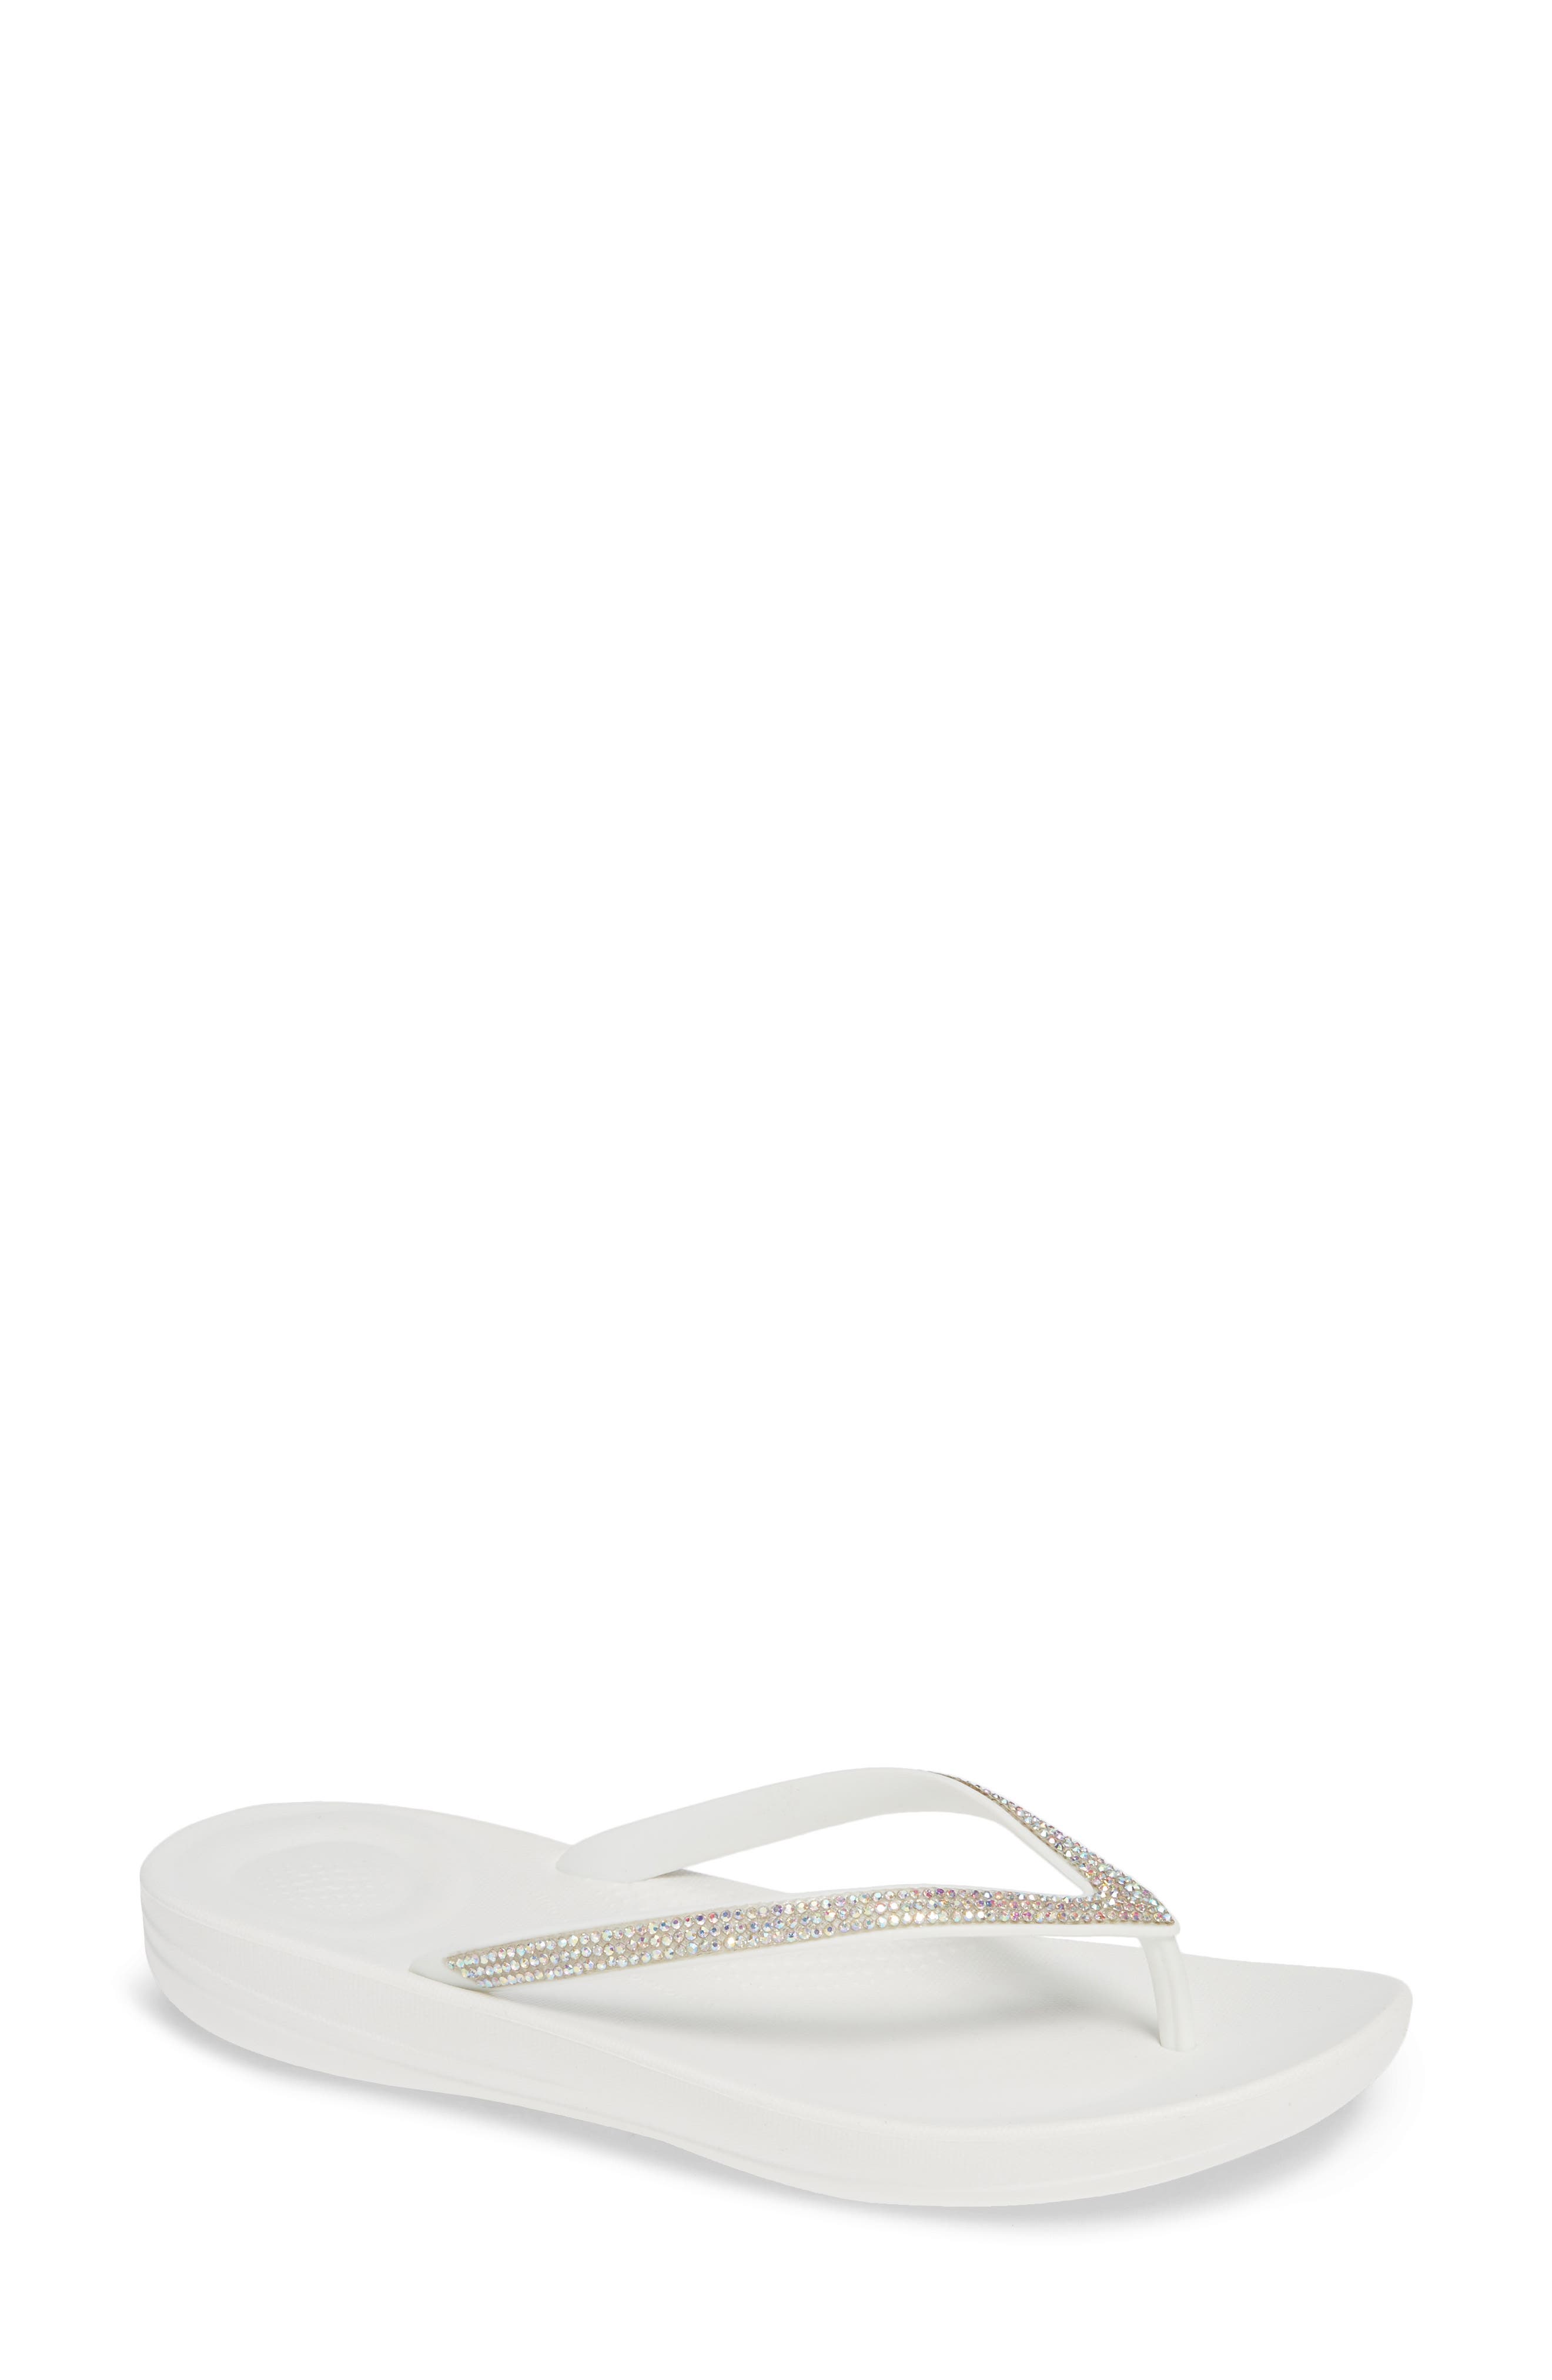 fitflop shoes nordstrom